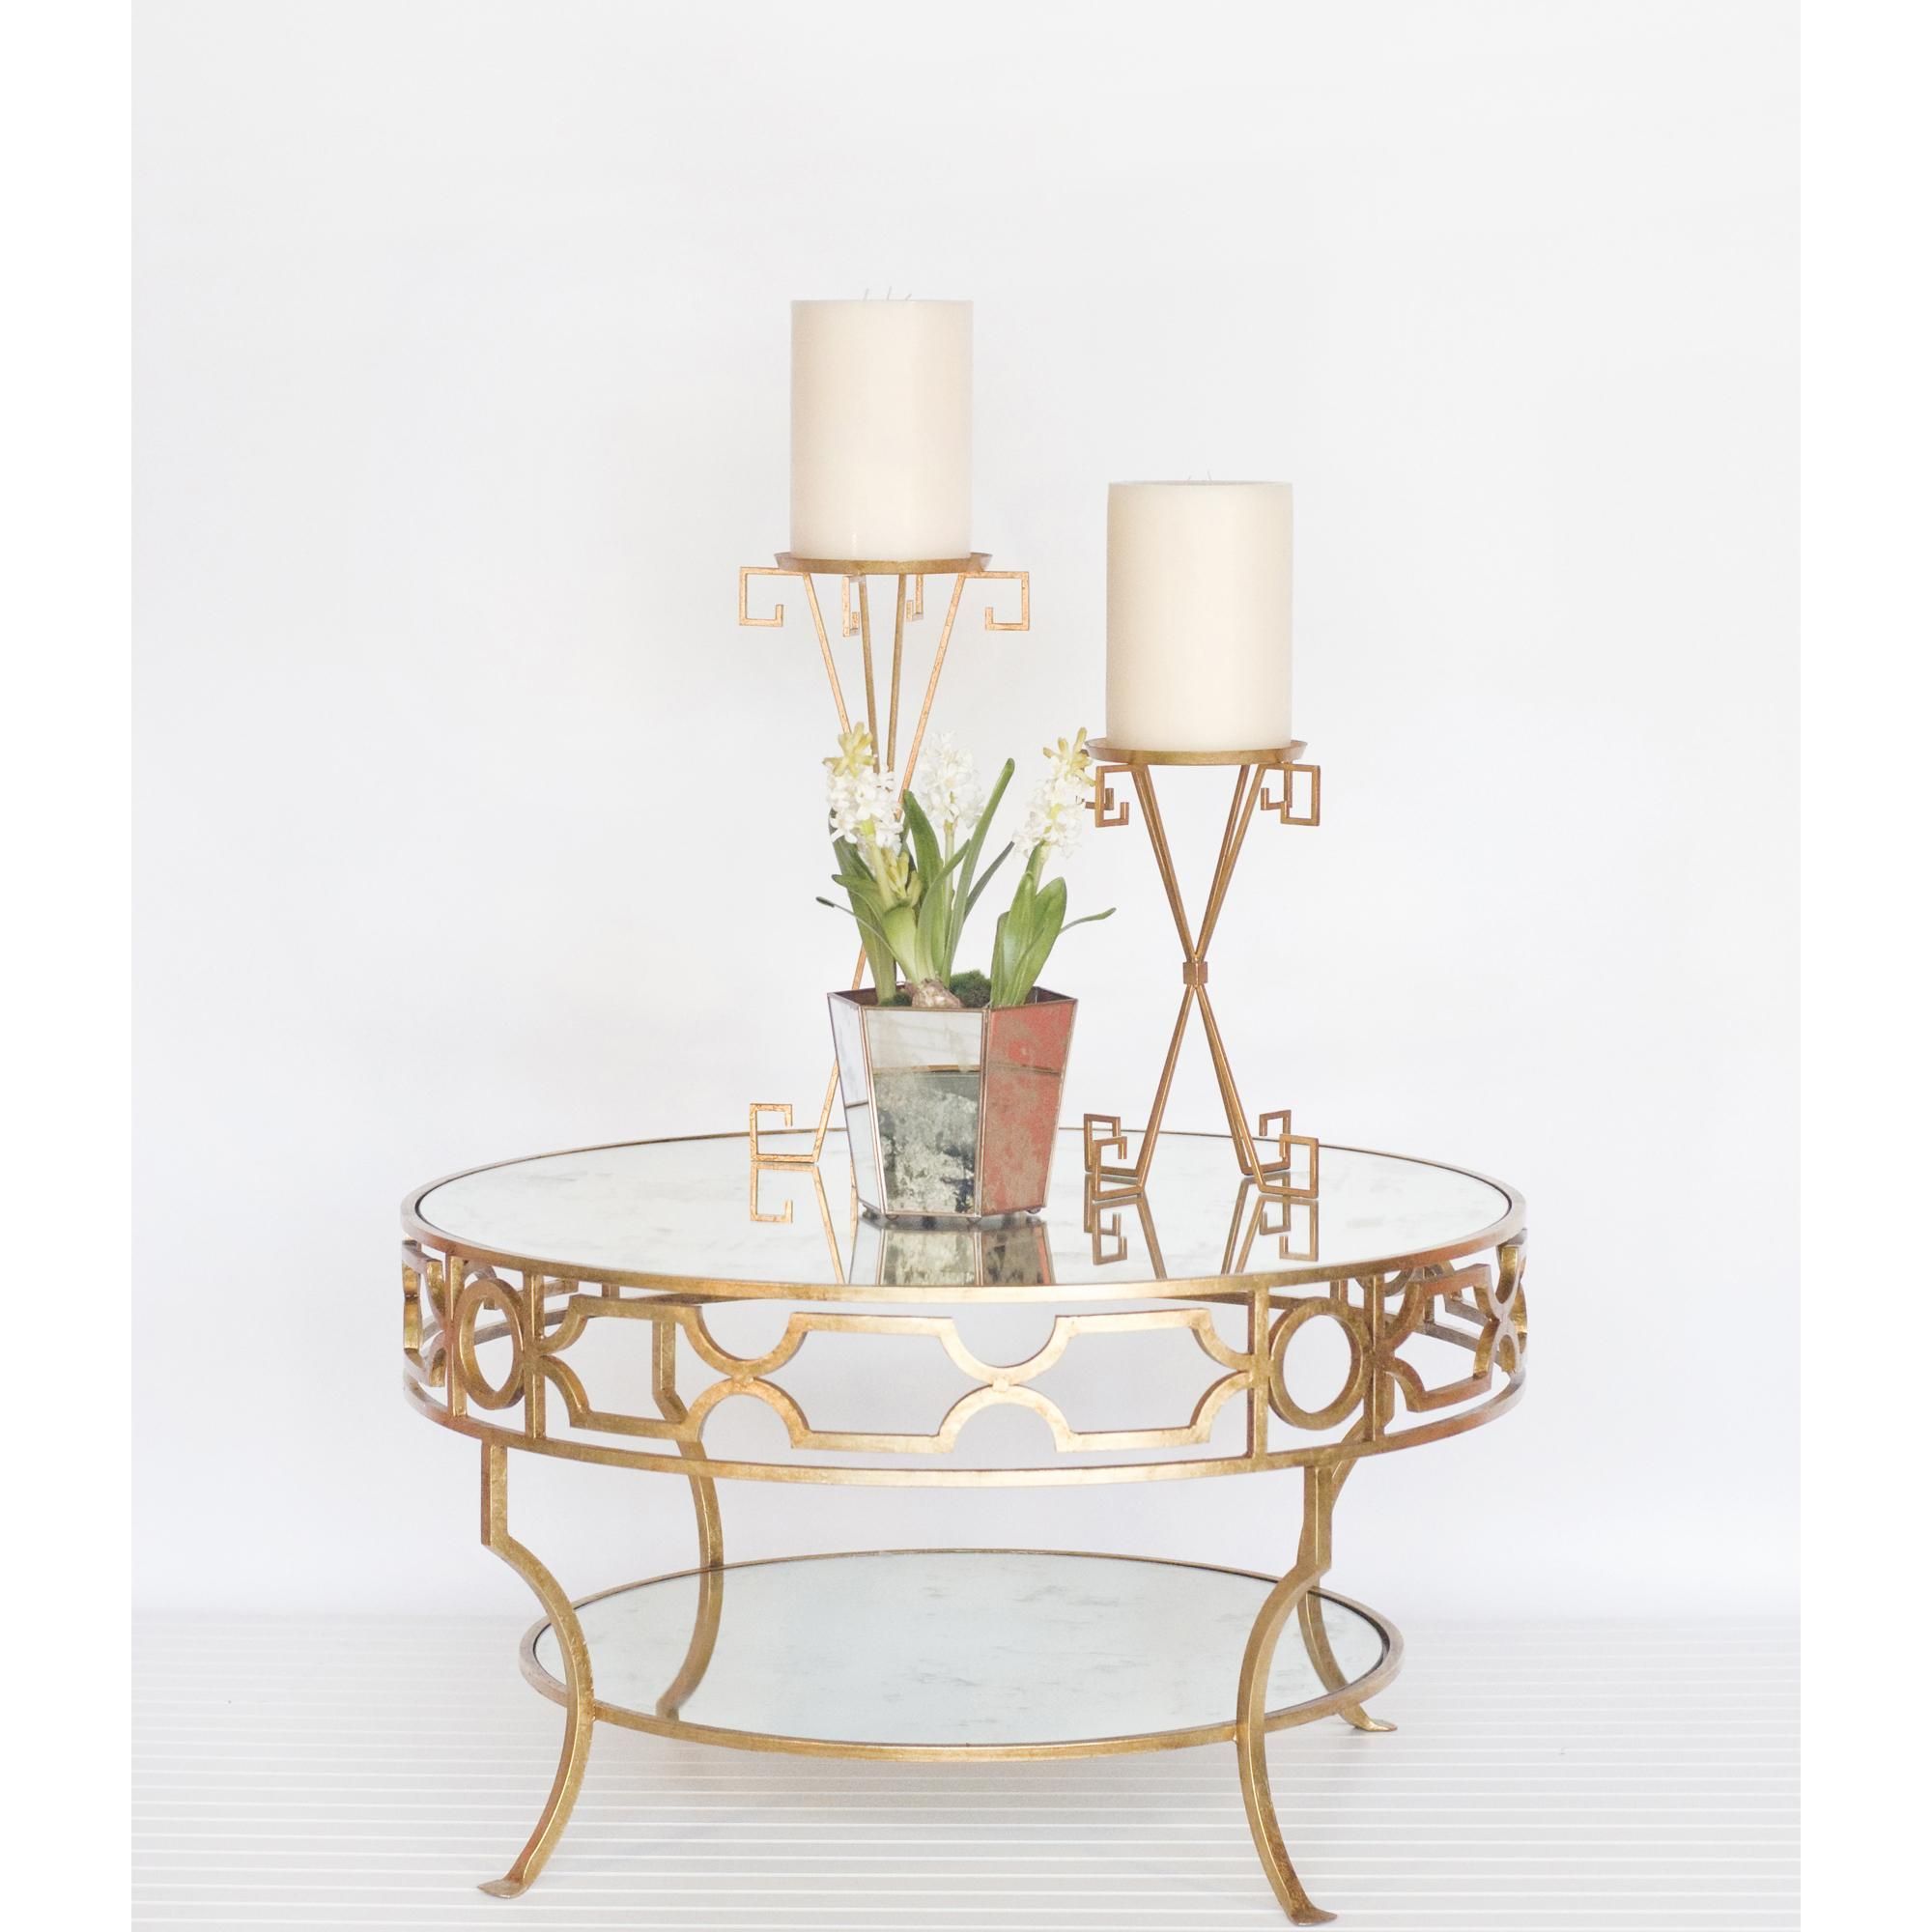 Two Tier Gold Leaf Coffee Table With Antique Mirror Regarding Antiqued Gold Leaf Console Tables (View 16 of 20)